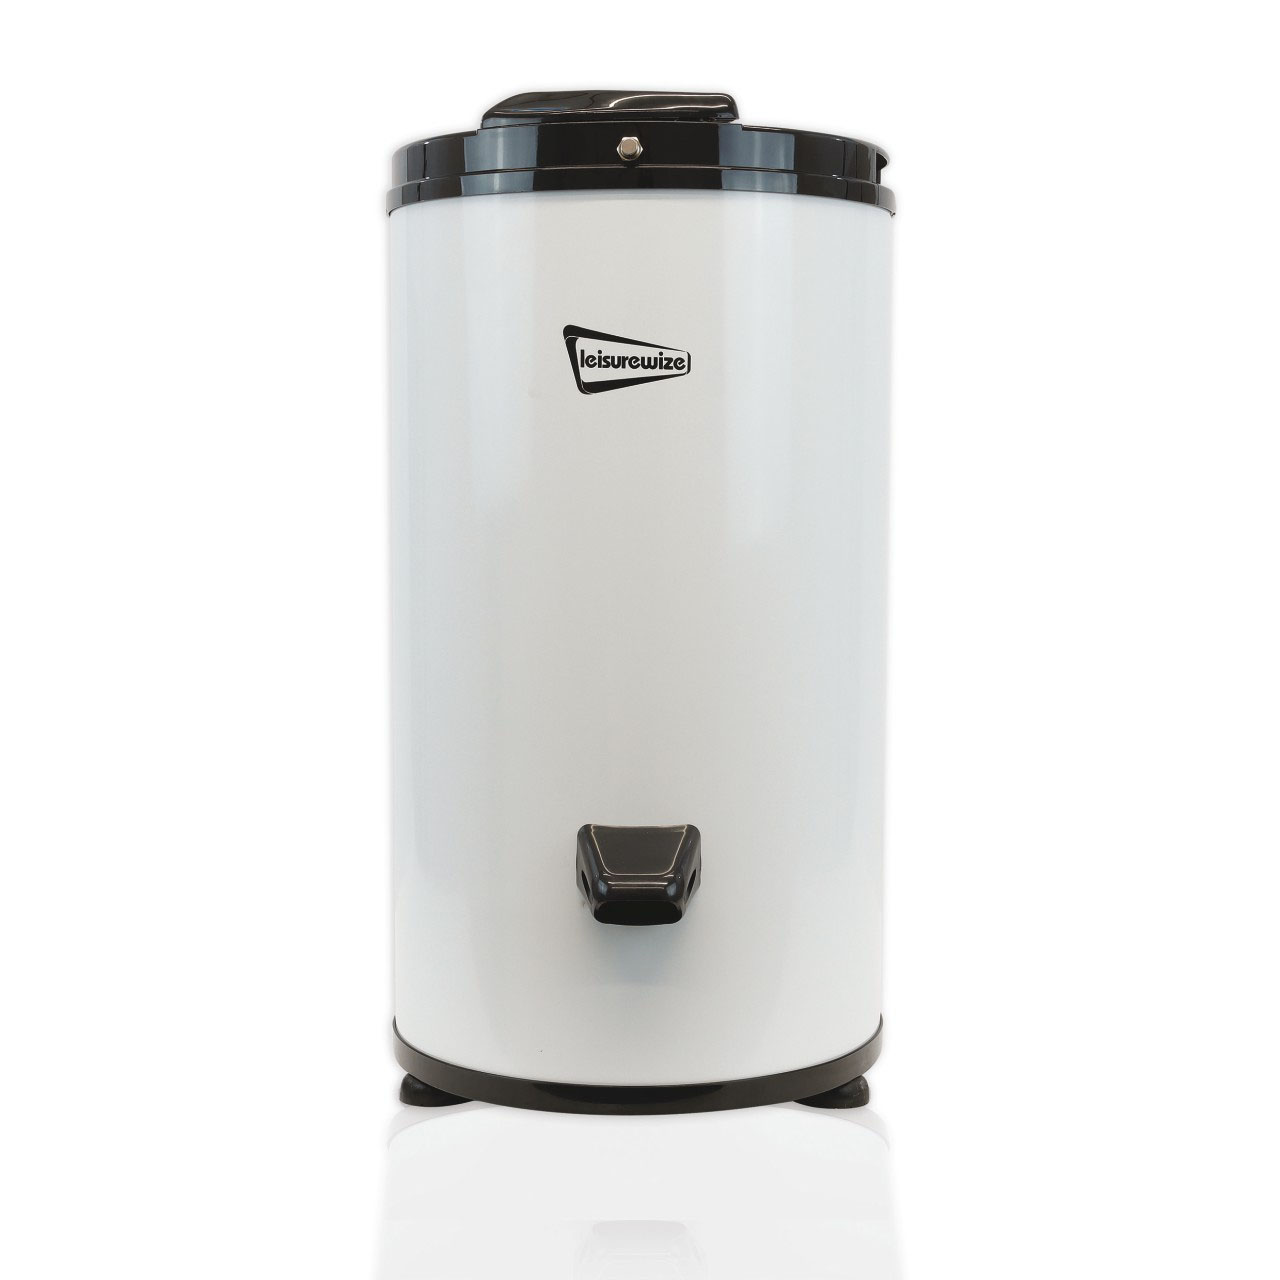 Portable Spin Dryer